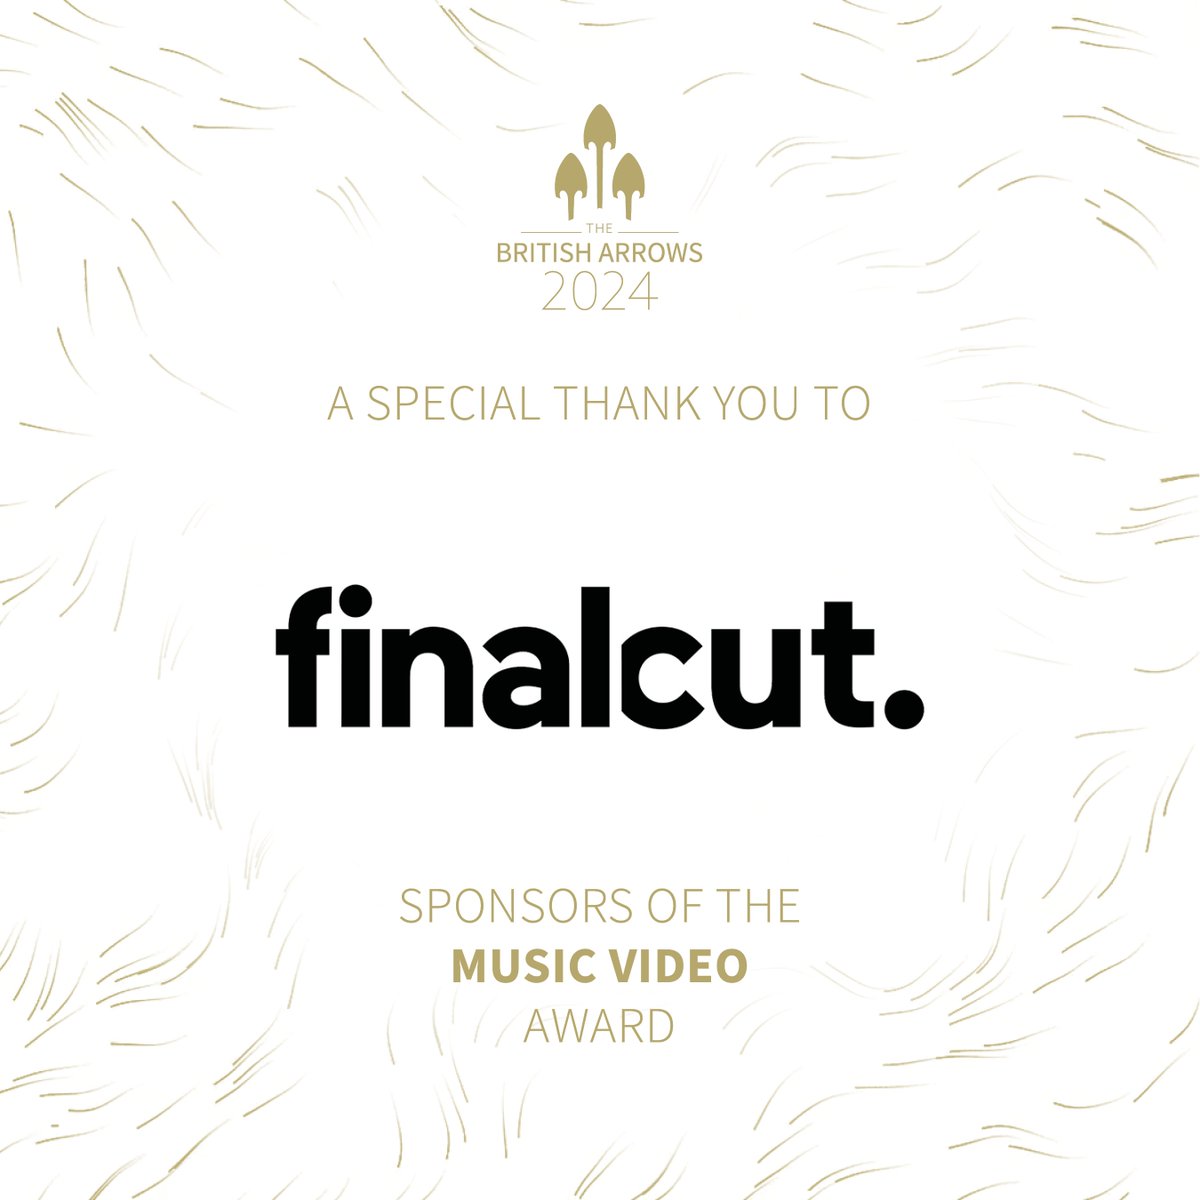 A special thank you to Final Cut Sponsors of the Music Video Award #BA23 #BA23 #BritishArrows #advertising #award #celebration